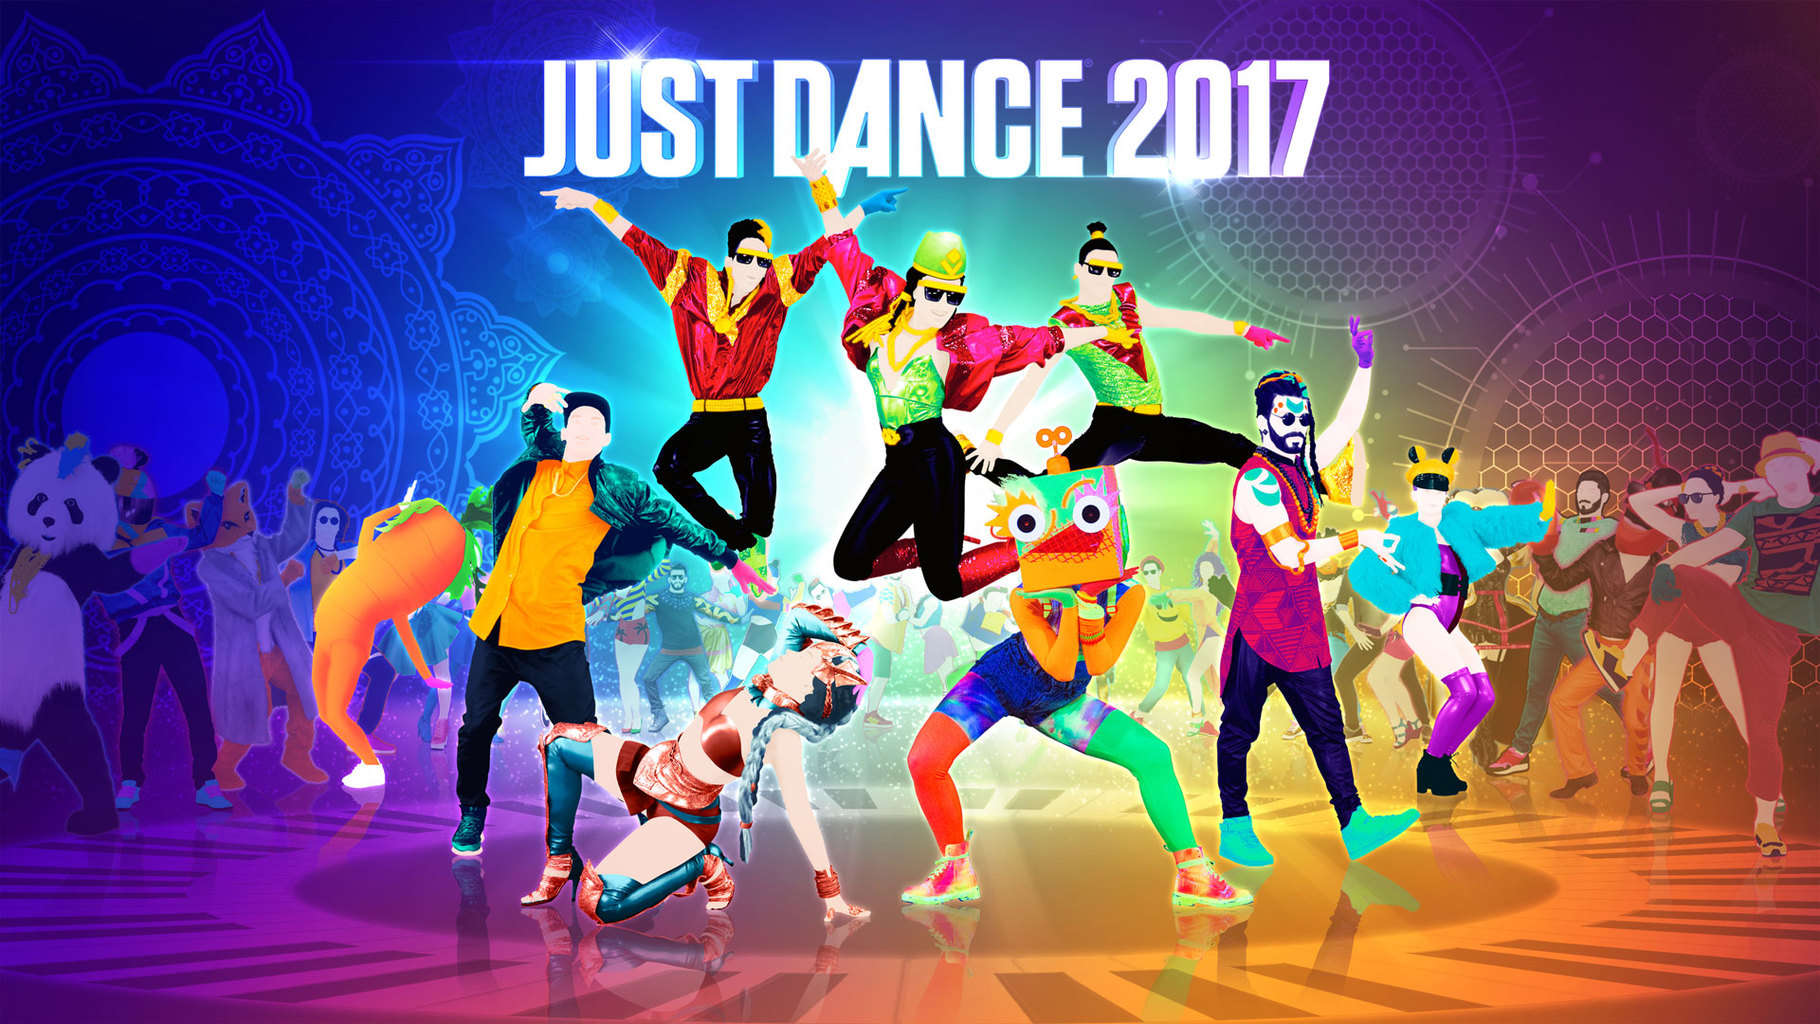 just-dance-2017-now-available-for-xbox-360-xbox-one-pc